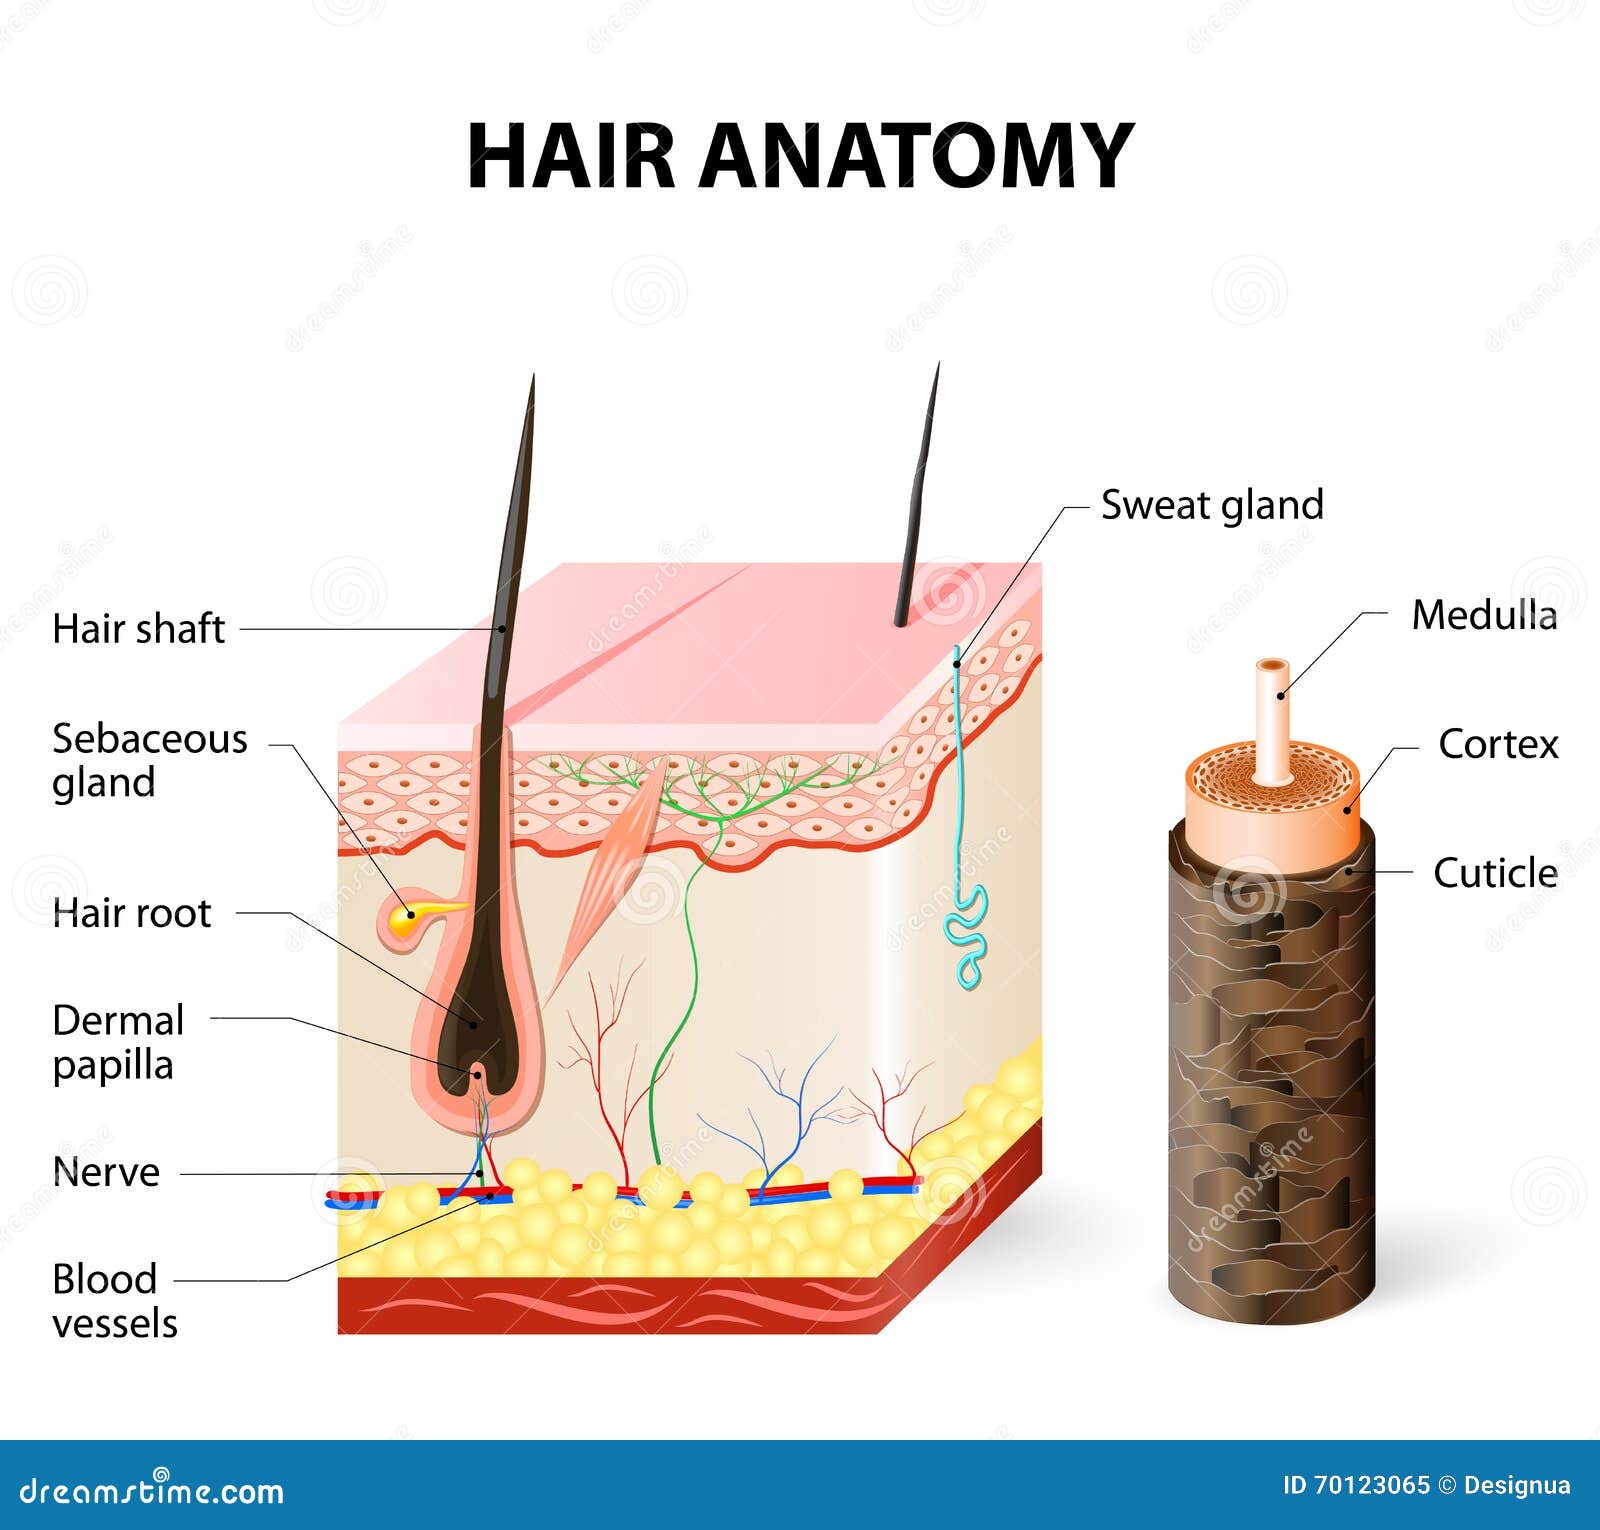 diagram of a hair follicle in a cross section of skin layers